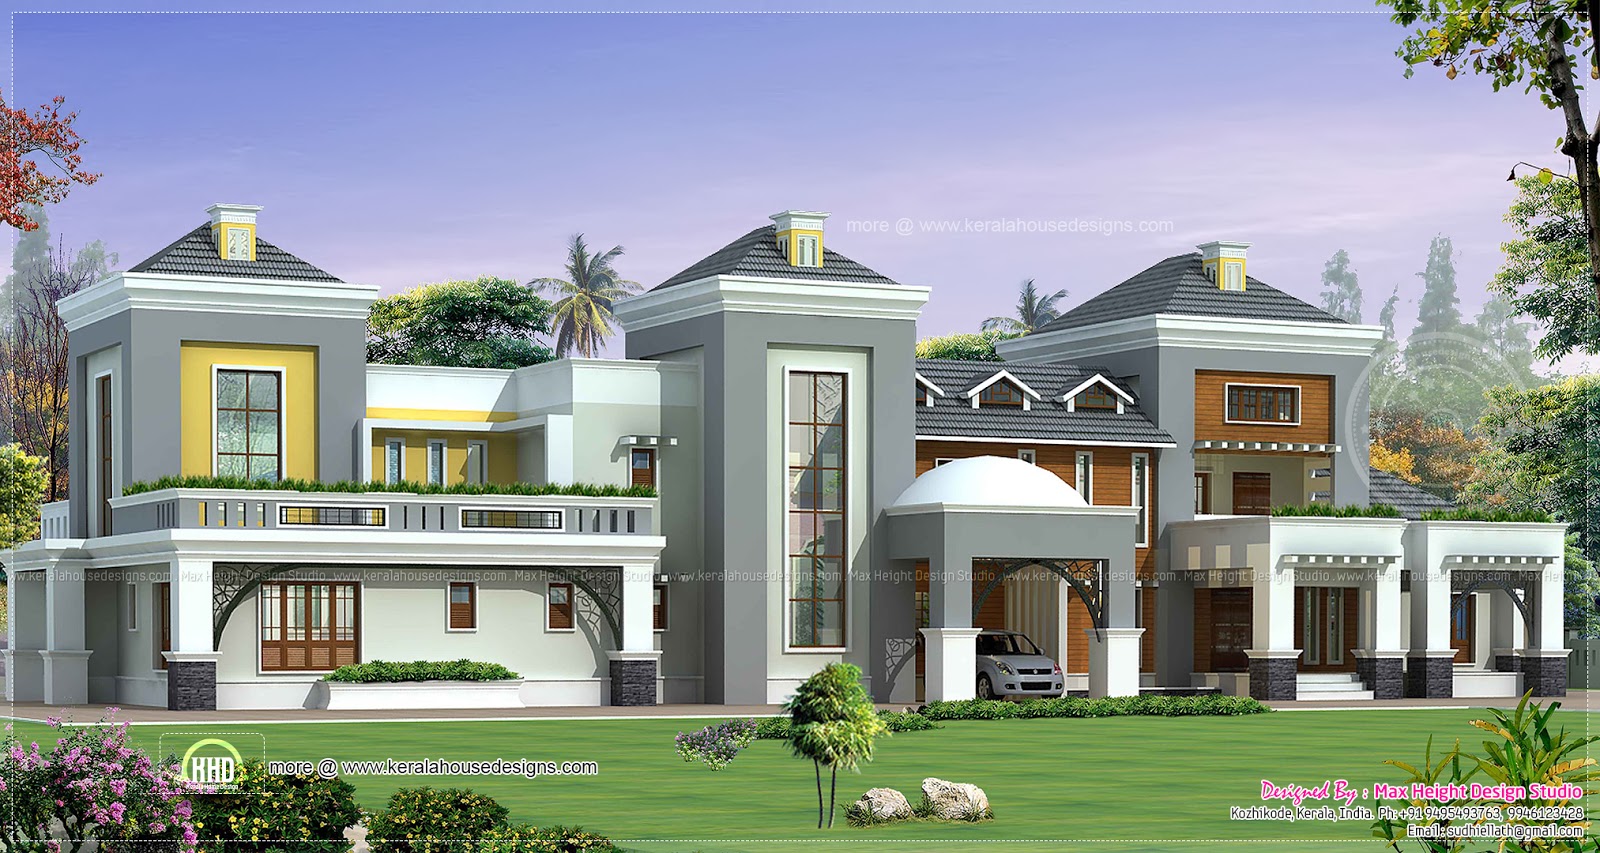 Luxury house plan with photo - Kerala home design and floor plans